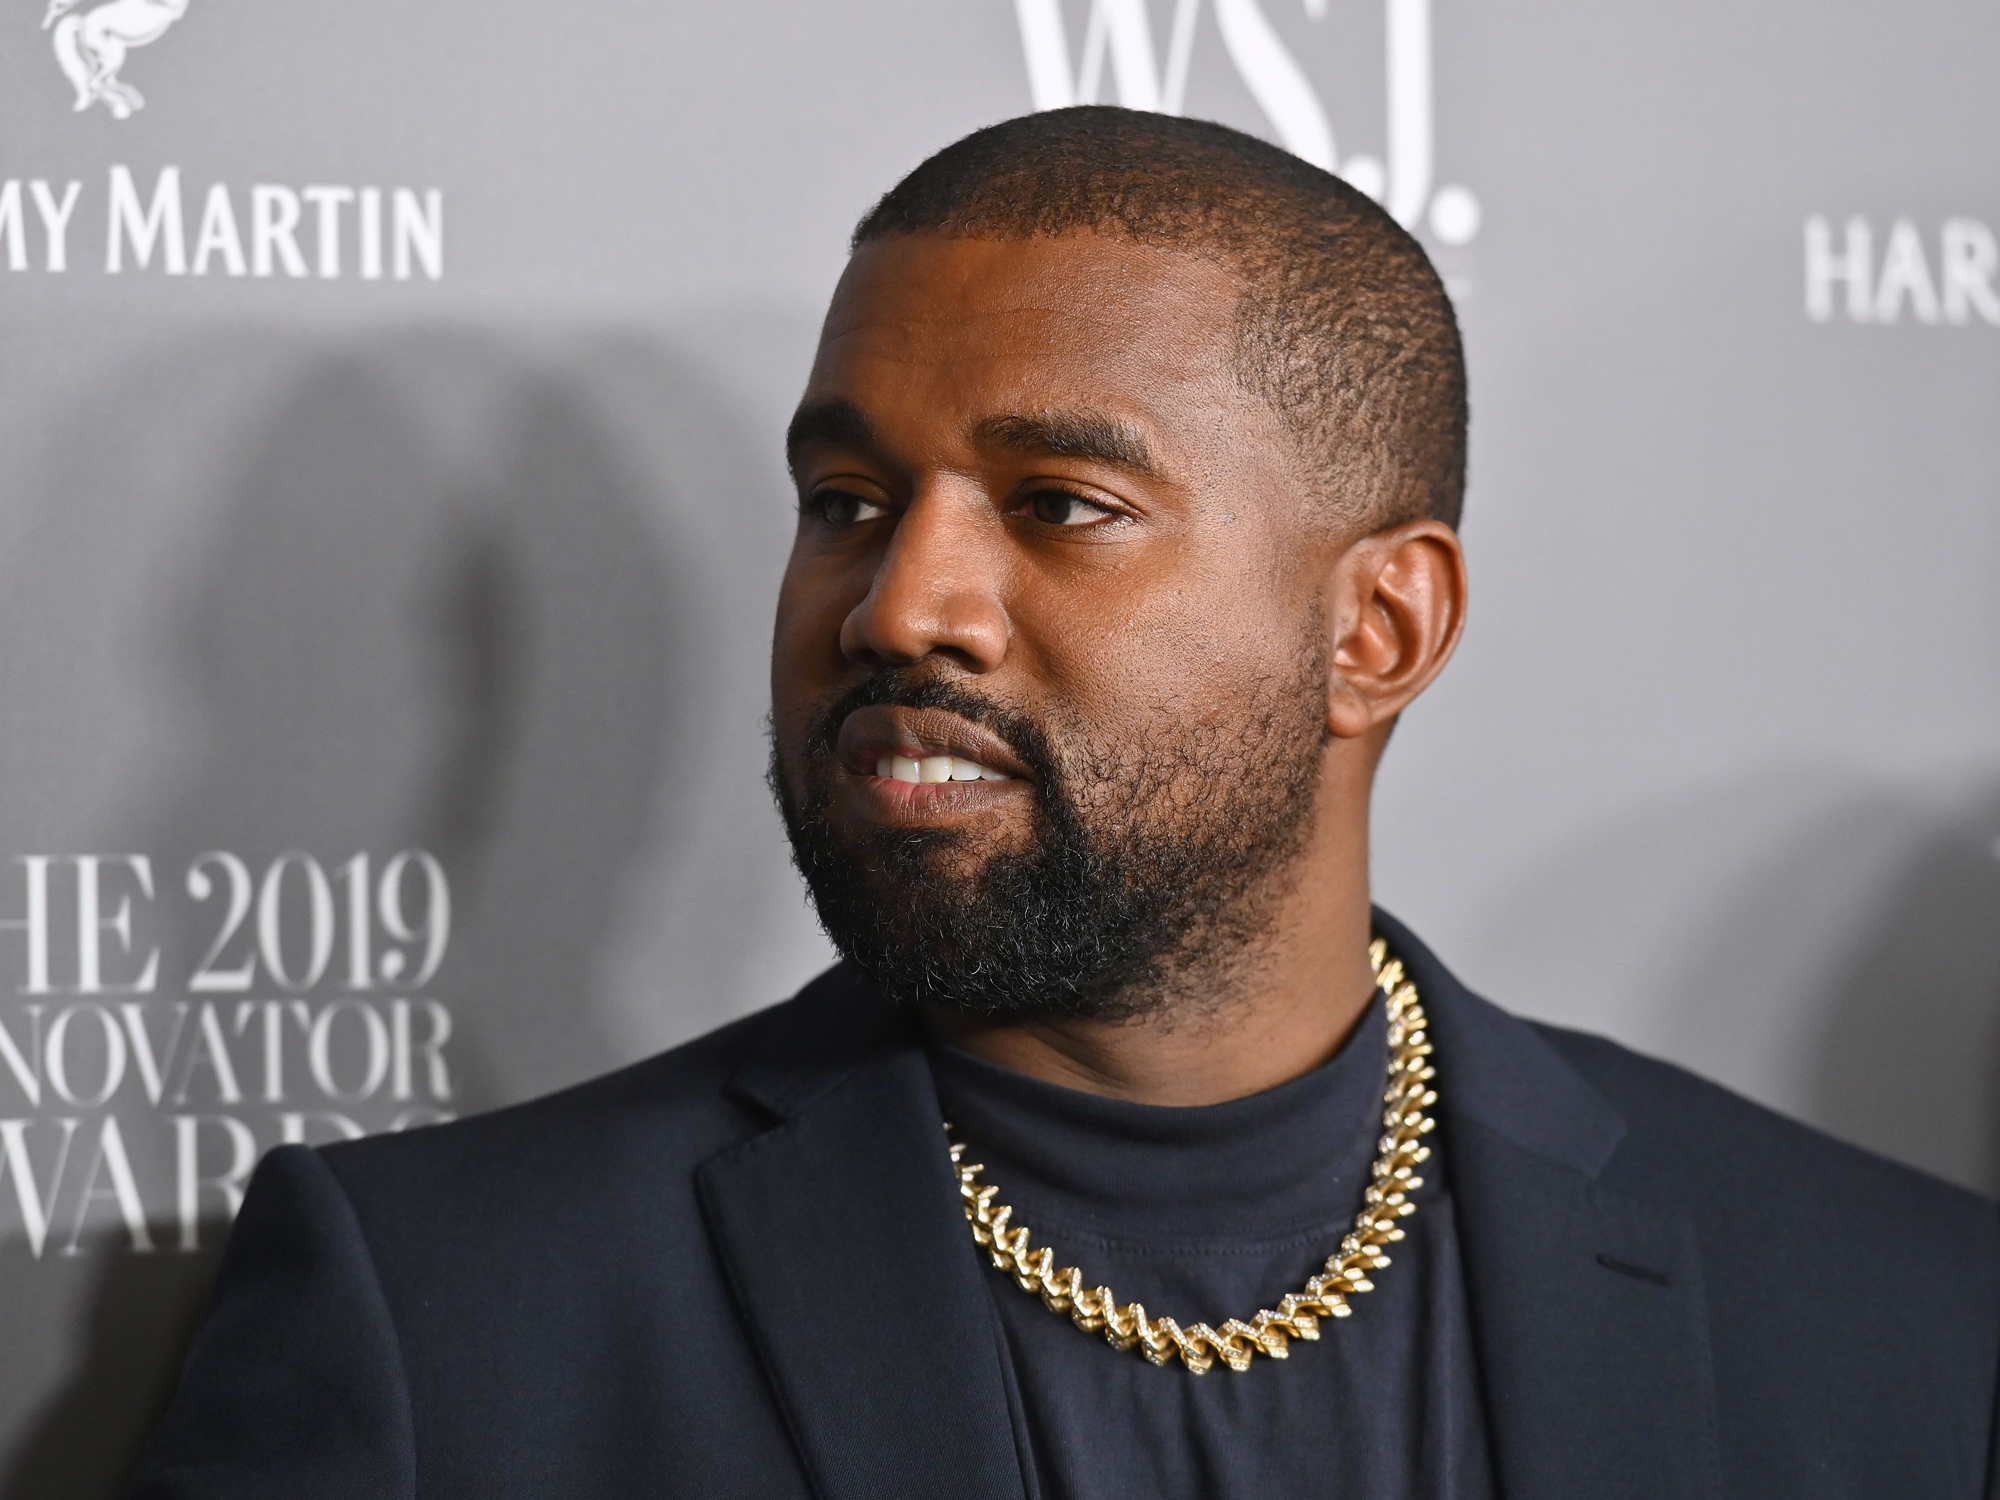 Kanye West (Ye) Drops Off Forbes Billionaires' List as Adidas Cuts